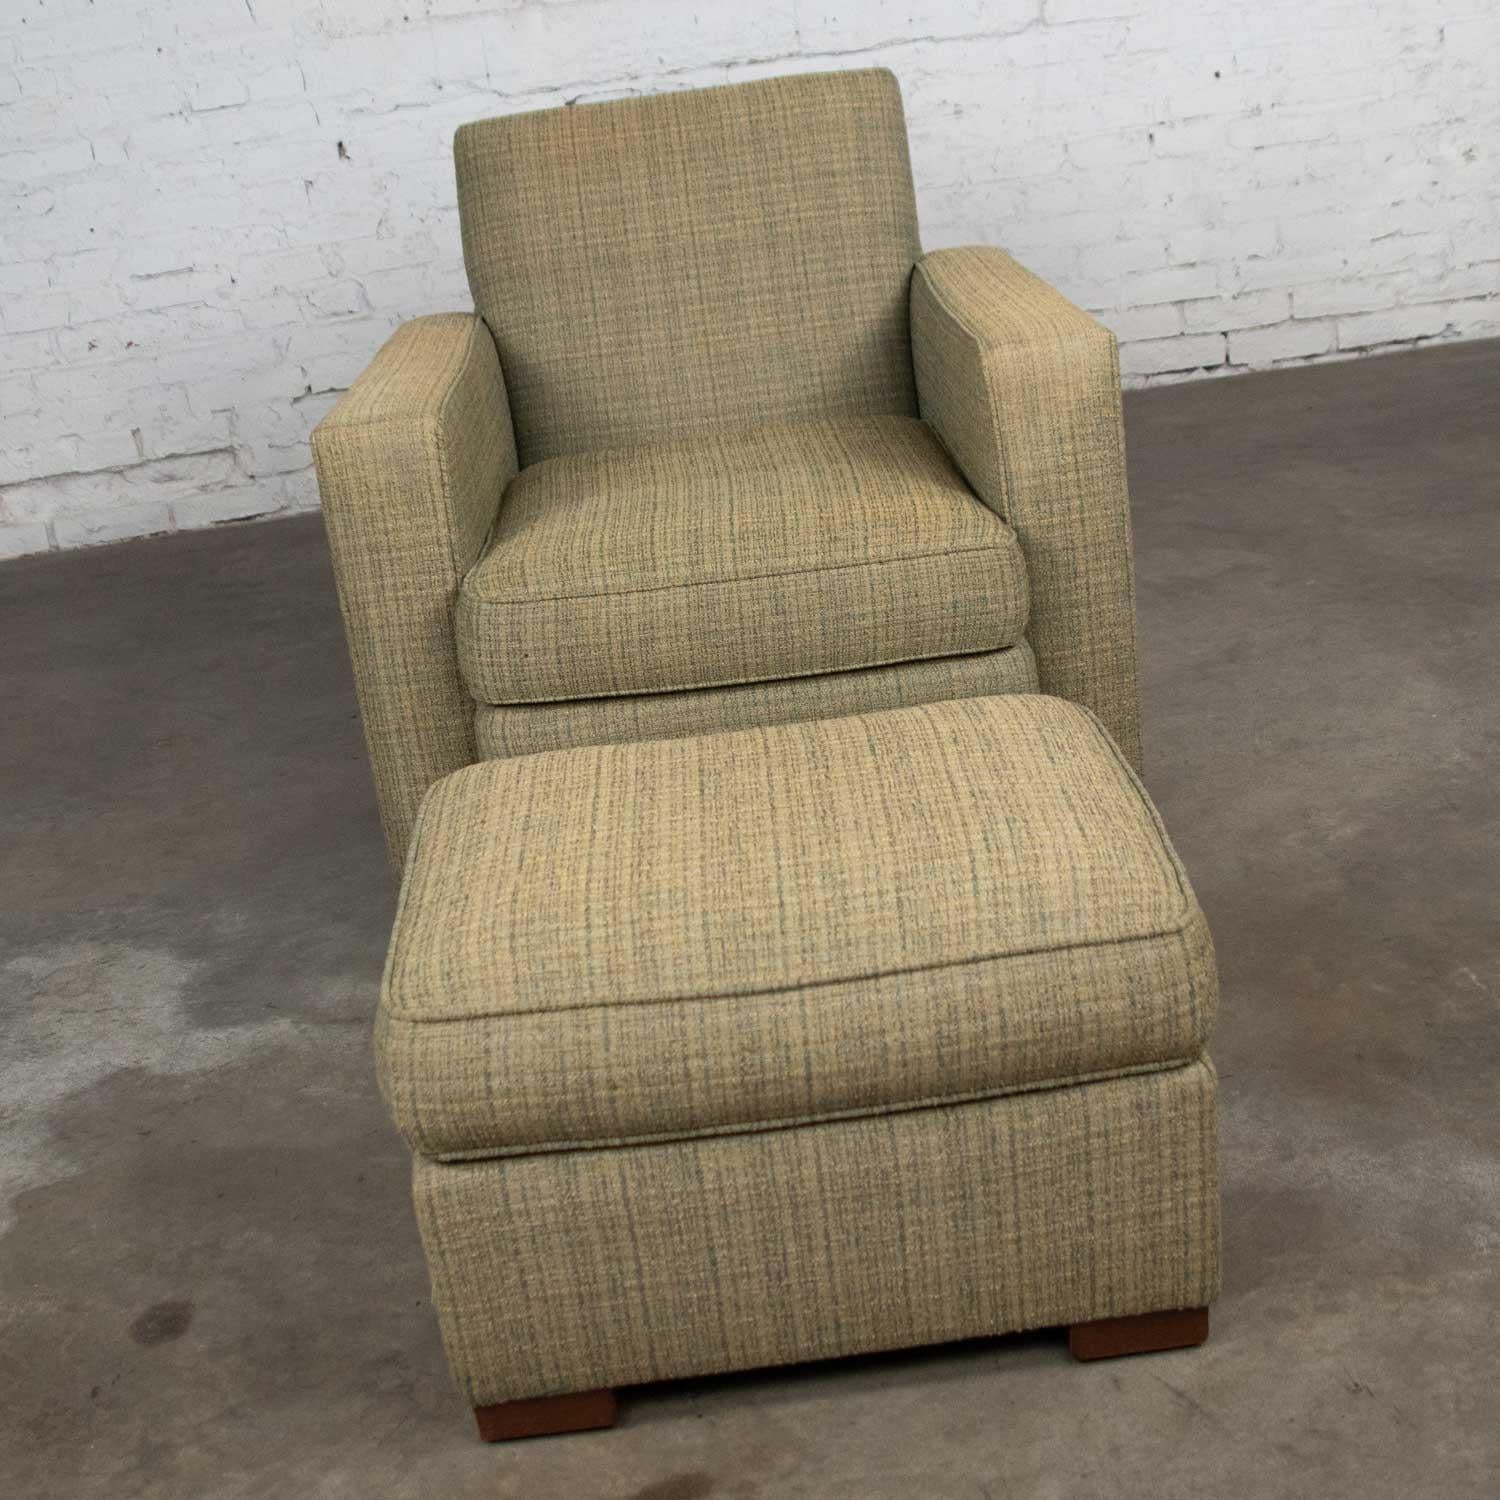 Handsome Art Deco style club chair and ottoman by Hickory Chair in a green tweed like fabric. They are in fabulous vintage condition. They have been professionally cleaned and are ready to use. There is a bit of discoloration on the very top edges